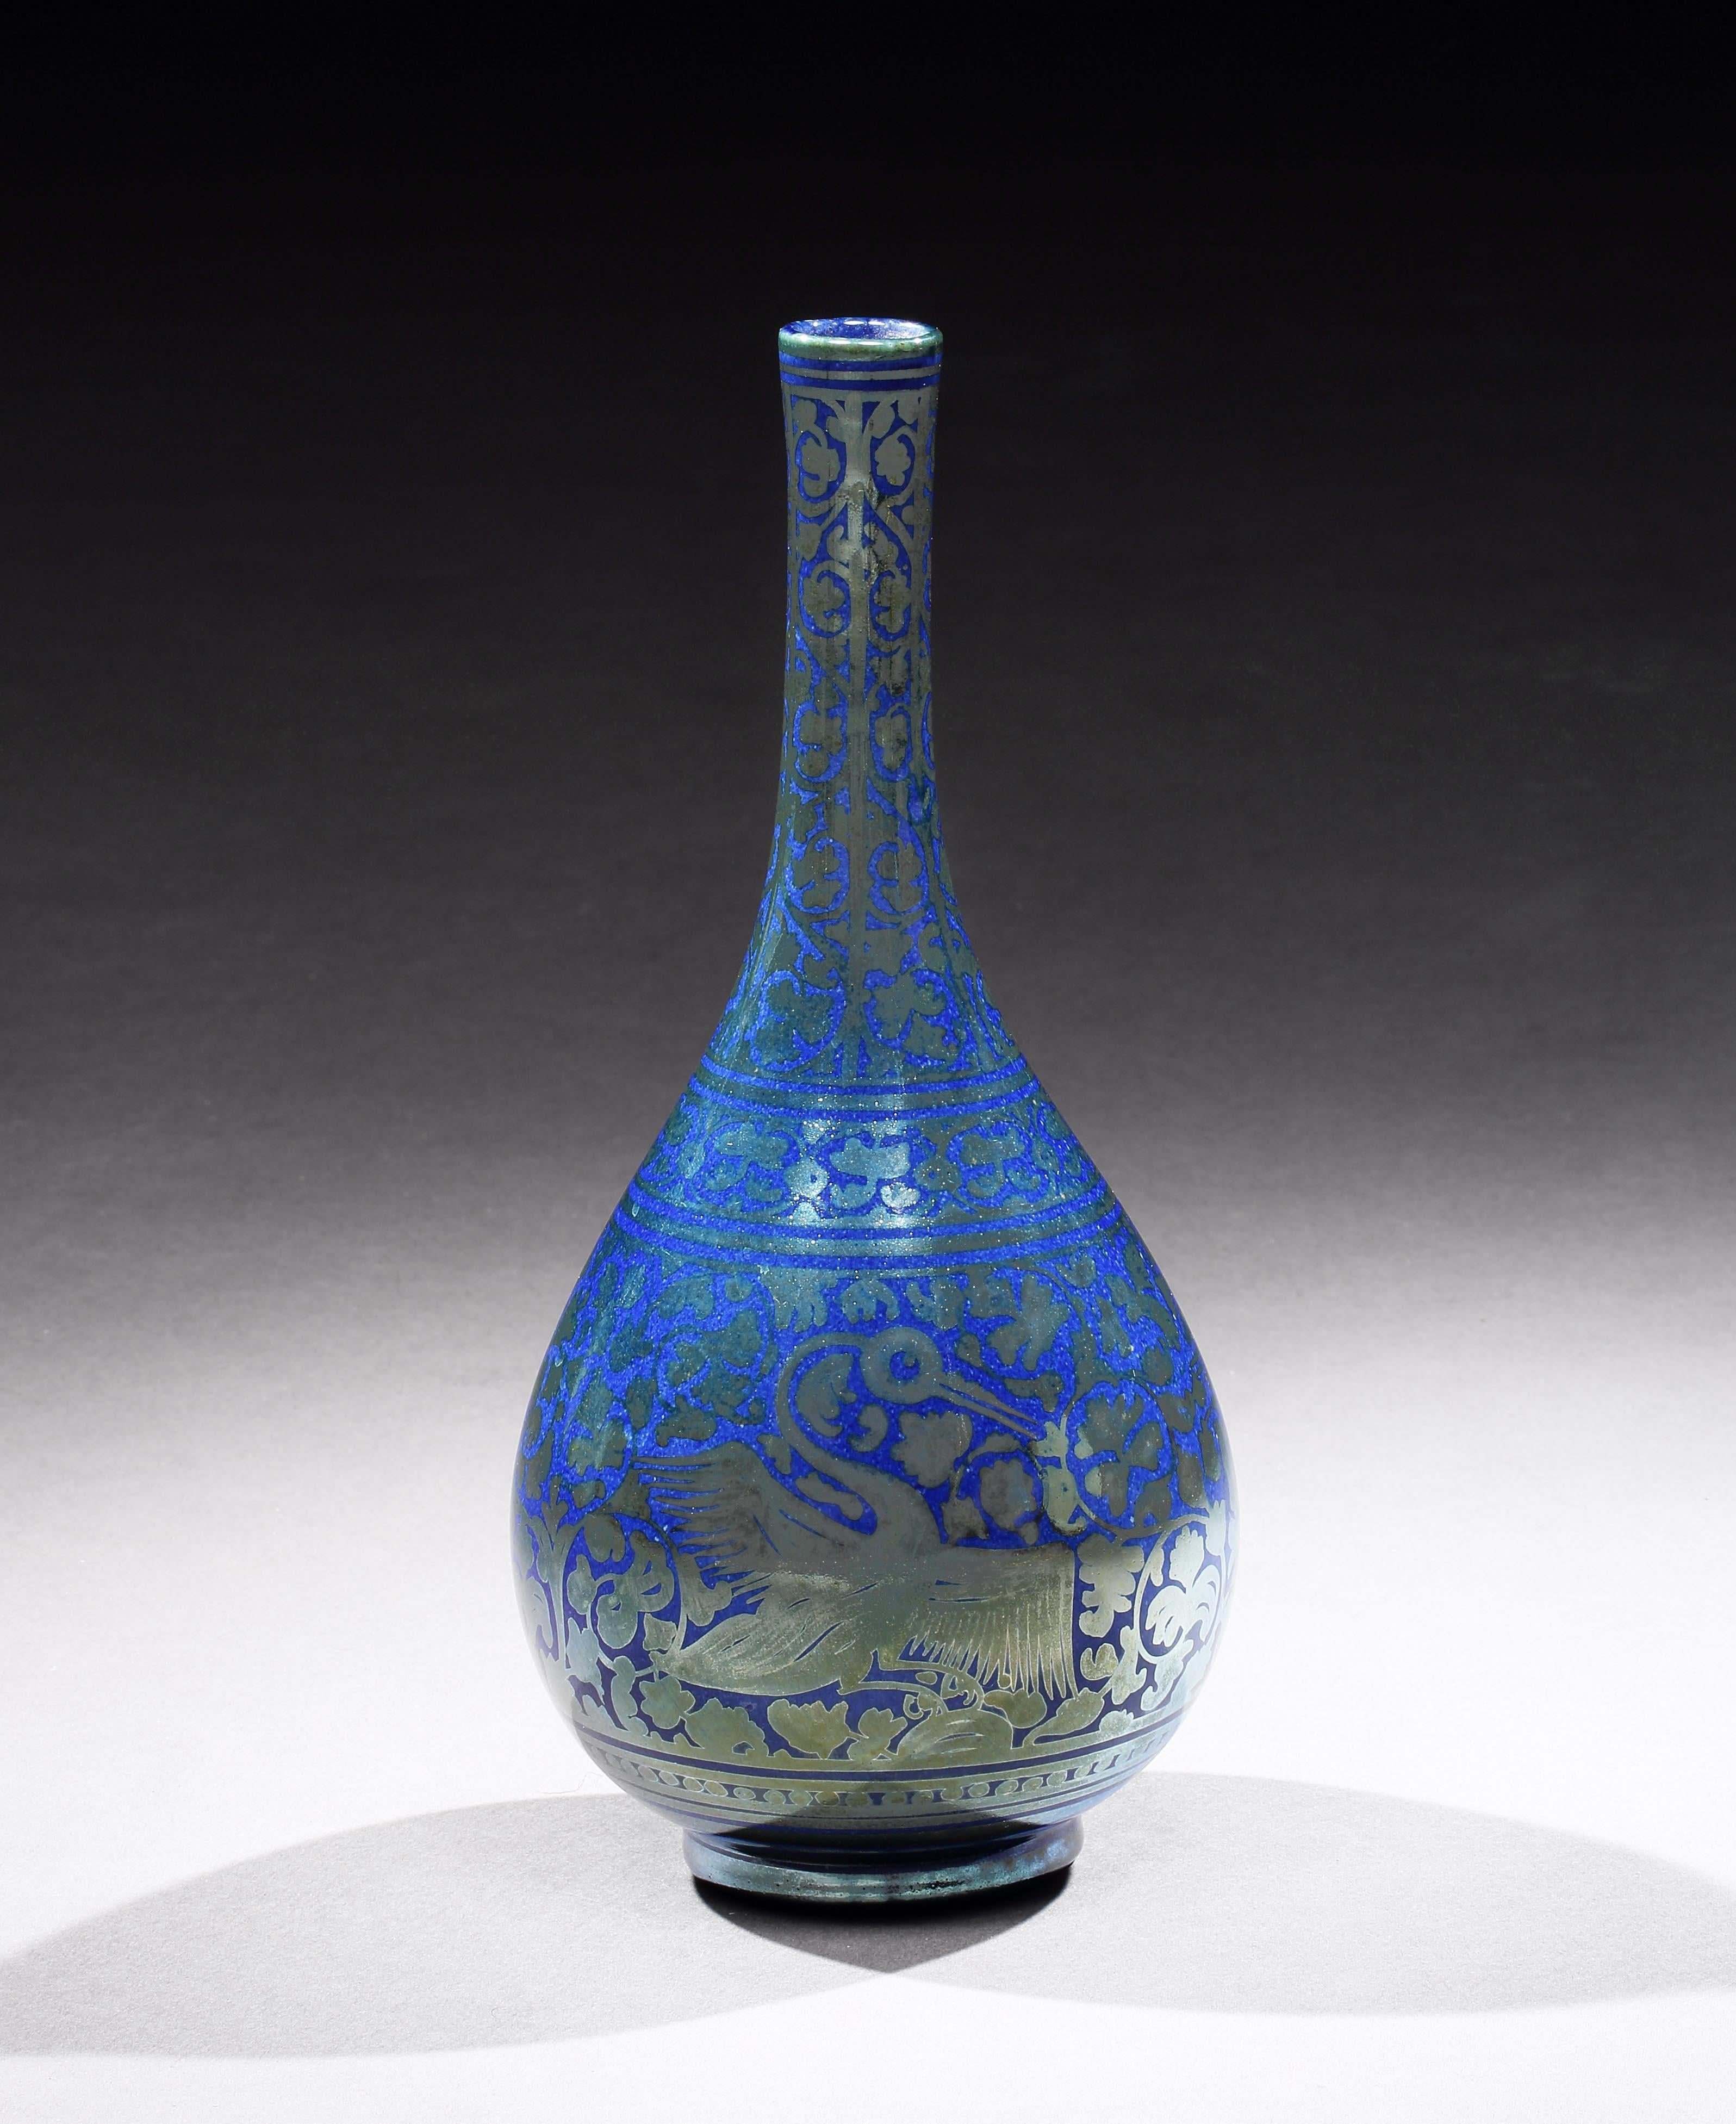 Ulisse Cantagalli (1839-1901) Florence, exceptional, lustre bottle, circa 1880

- Outstanding, recreation of the complex and subtle 16th century, ornamentation and glazes found on Islamic & Spanish origins lustred pottery from Valencia, Gubbia, and